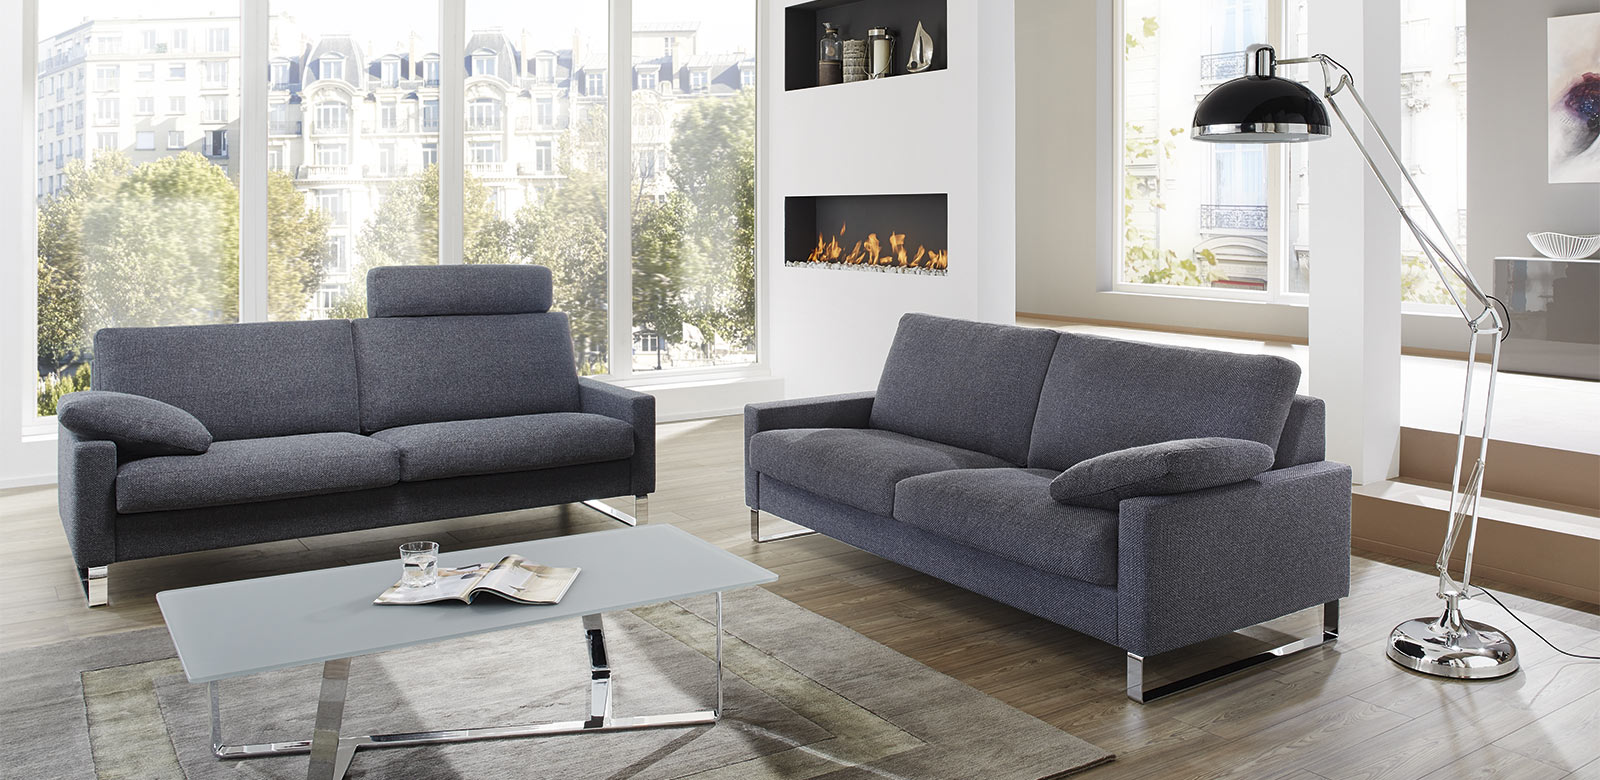 CL500 sofas with cushions and headrests in grey-blue fabric in modern flat with city view and fireplace.